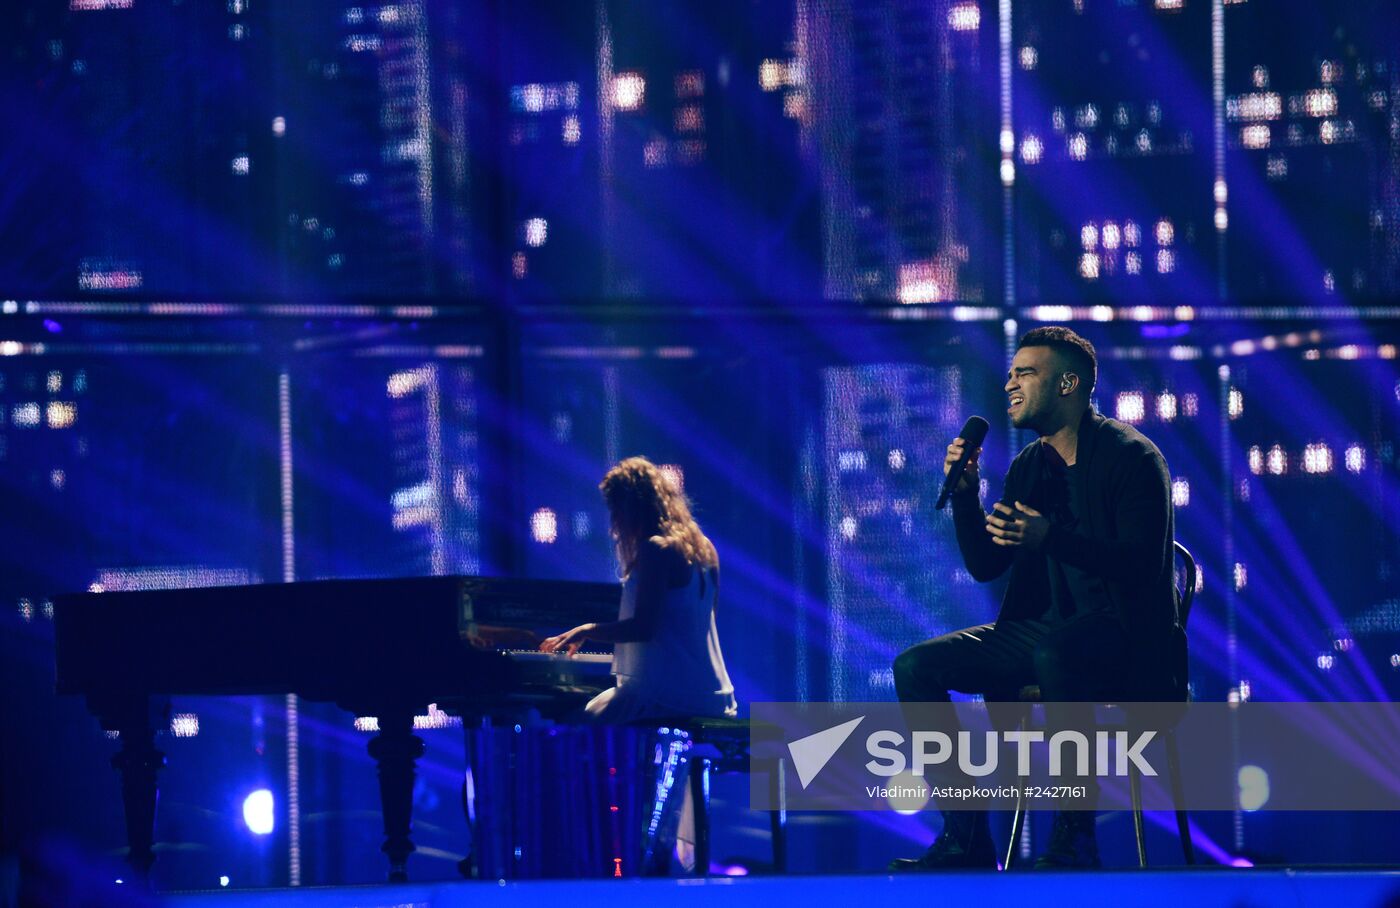 Eurovision Song Contest 2014 finals